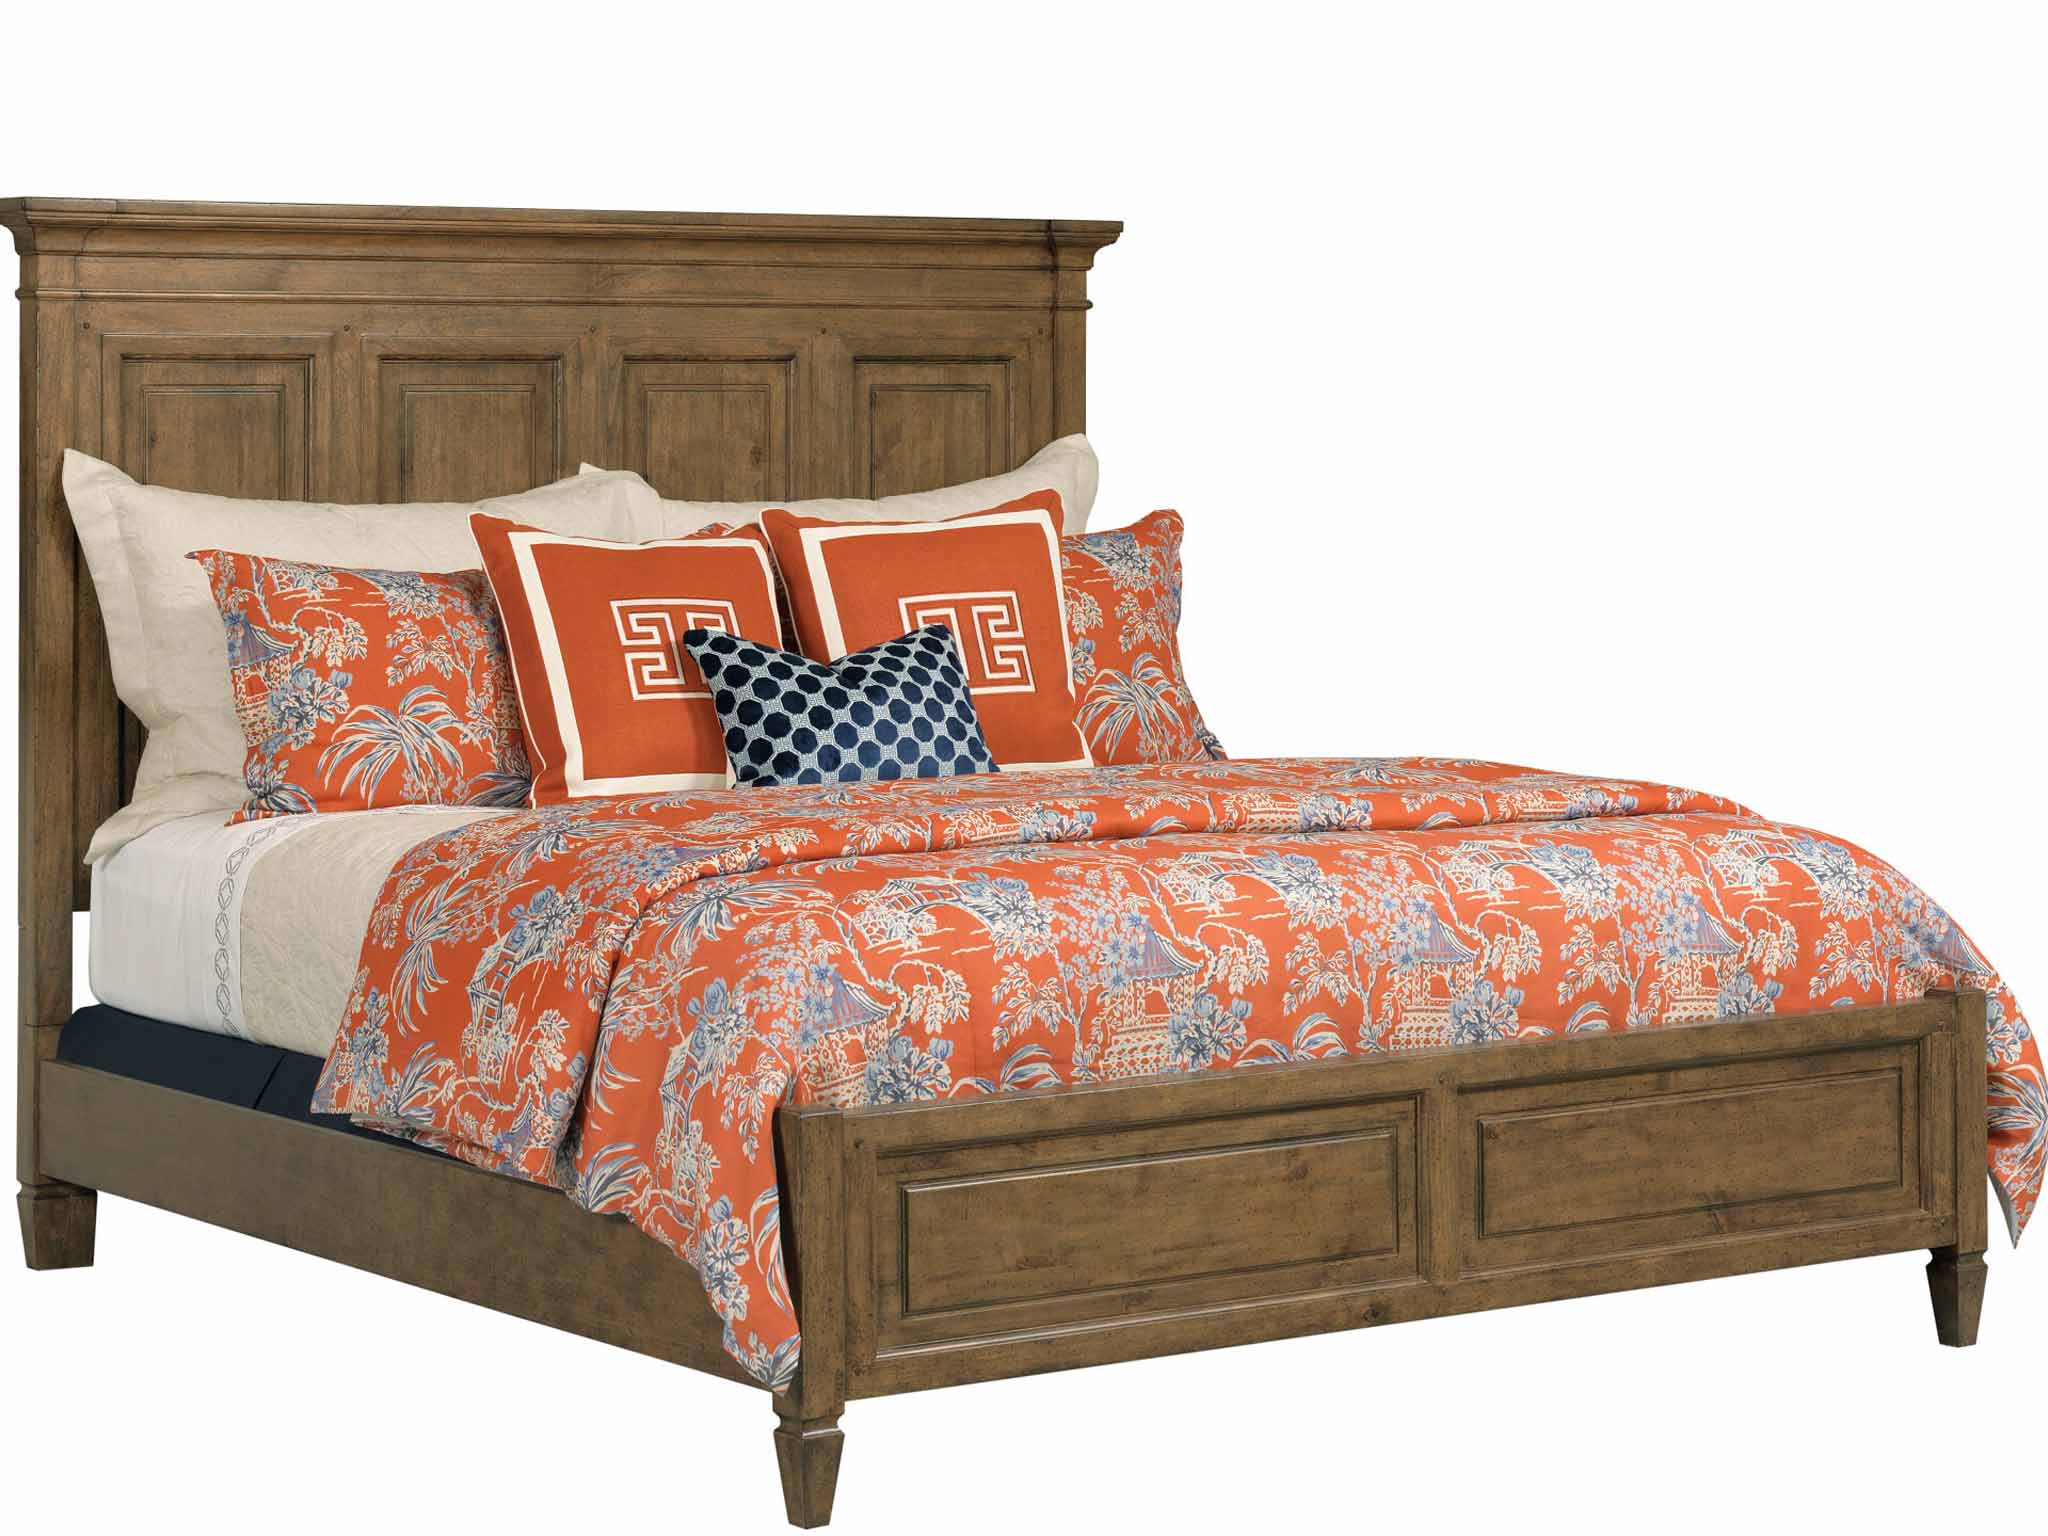 Kincaid 024-307P Ansley Hartnell Cal King Panel Bed - Complete